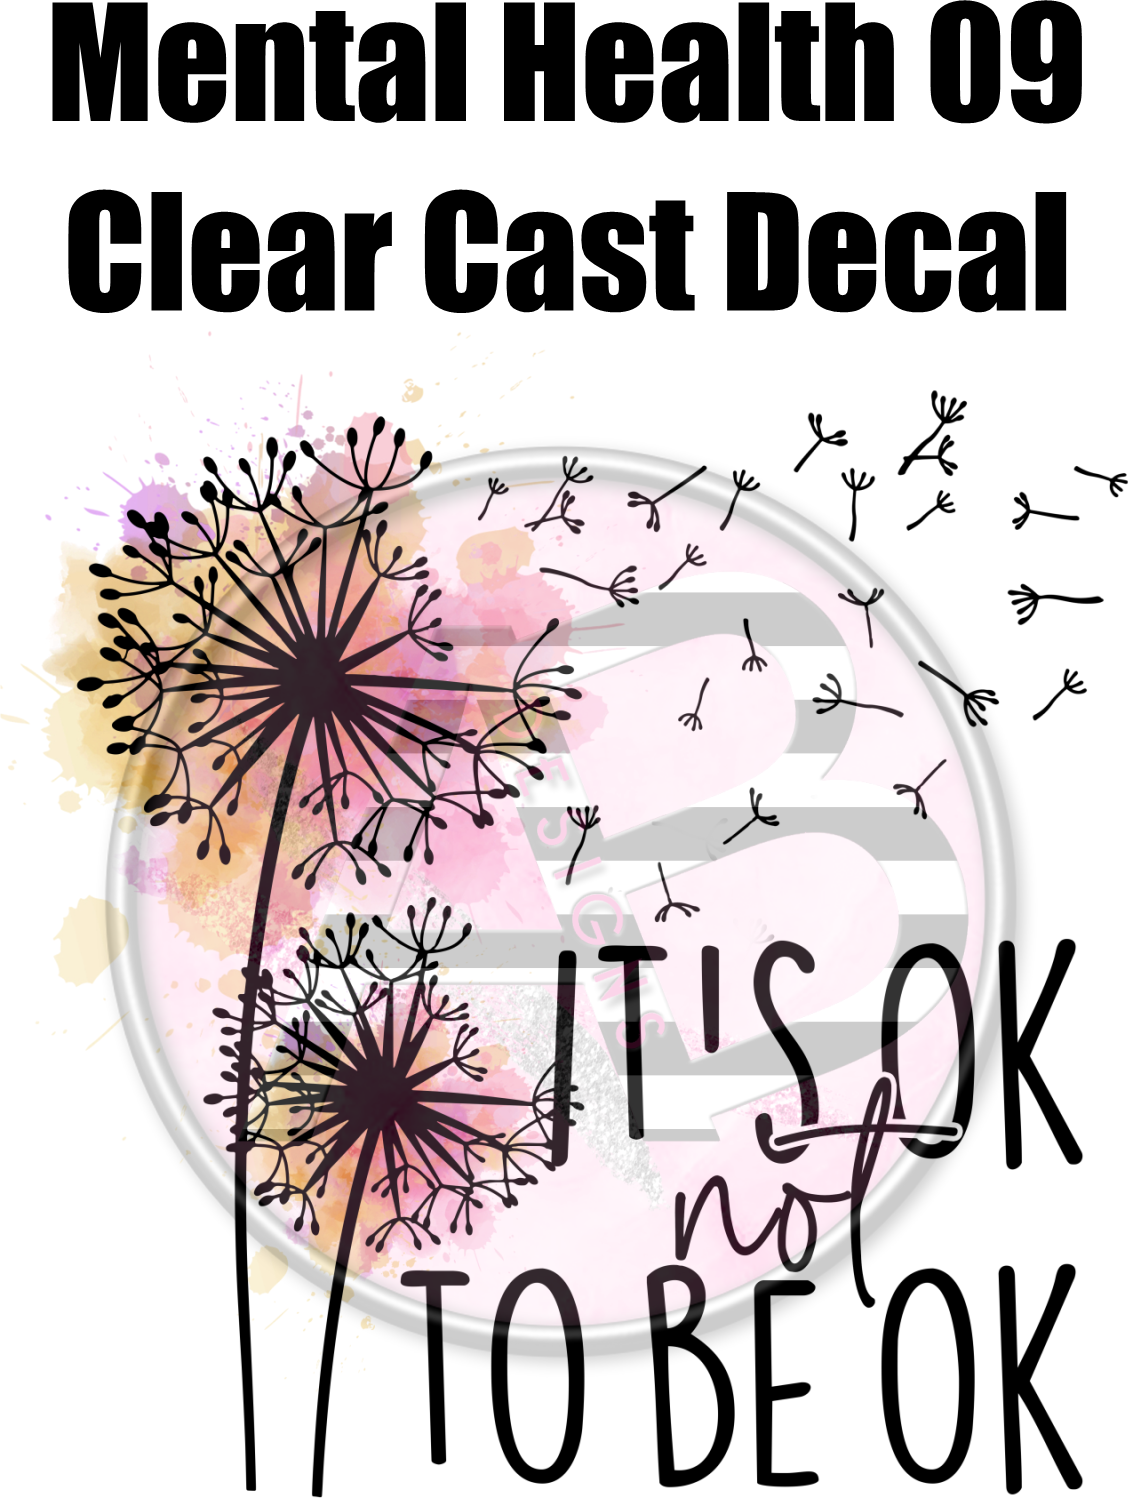 Mental Health 09 - Clear Cast Decal